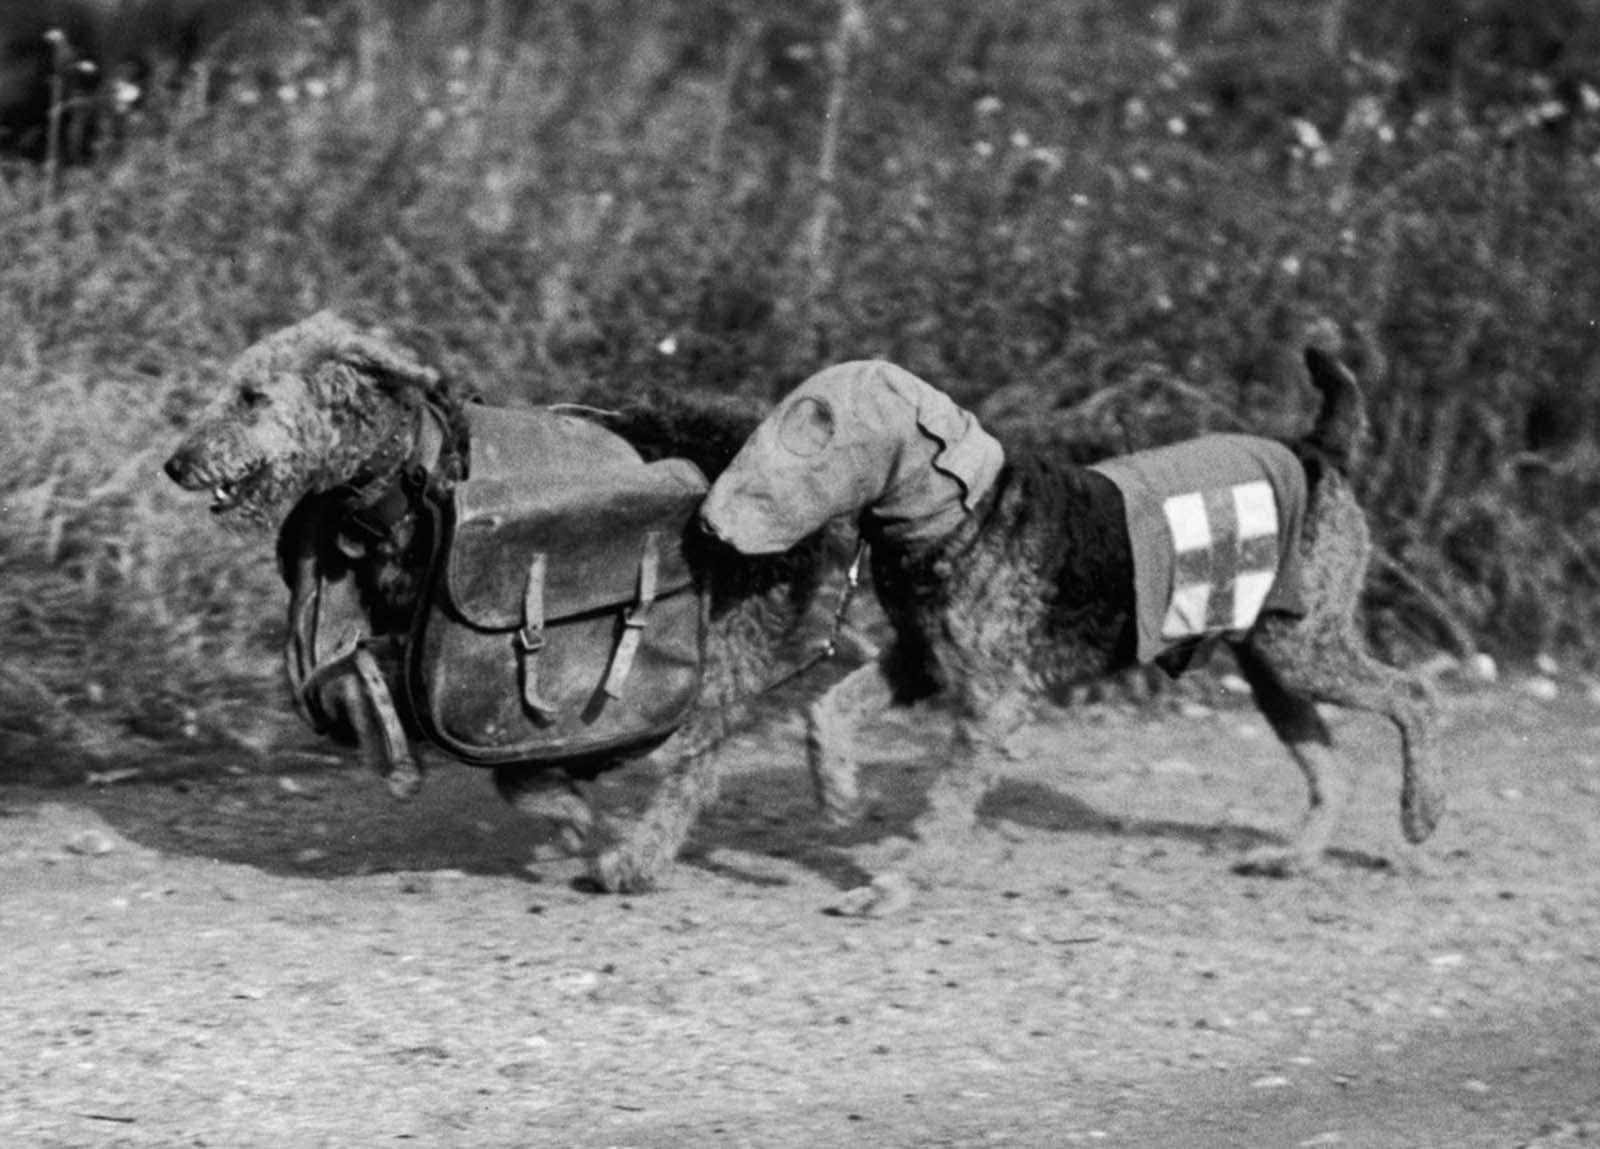 Two Airedale terriers in training at Lt. Colonel E. H. Richardson's camp in Surrey. 1939.